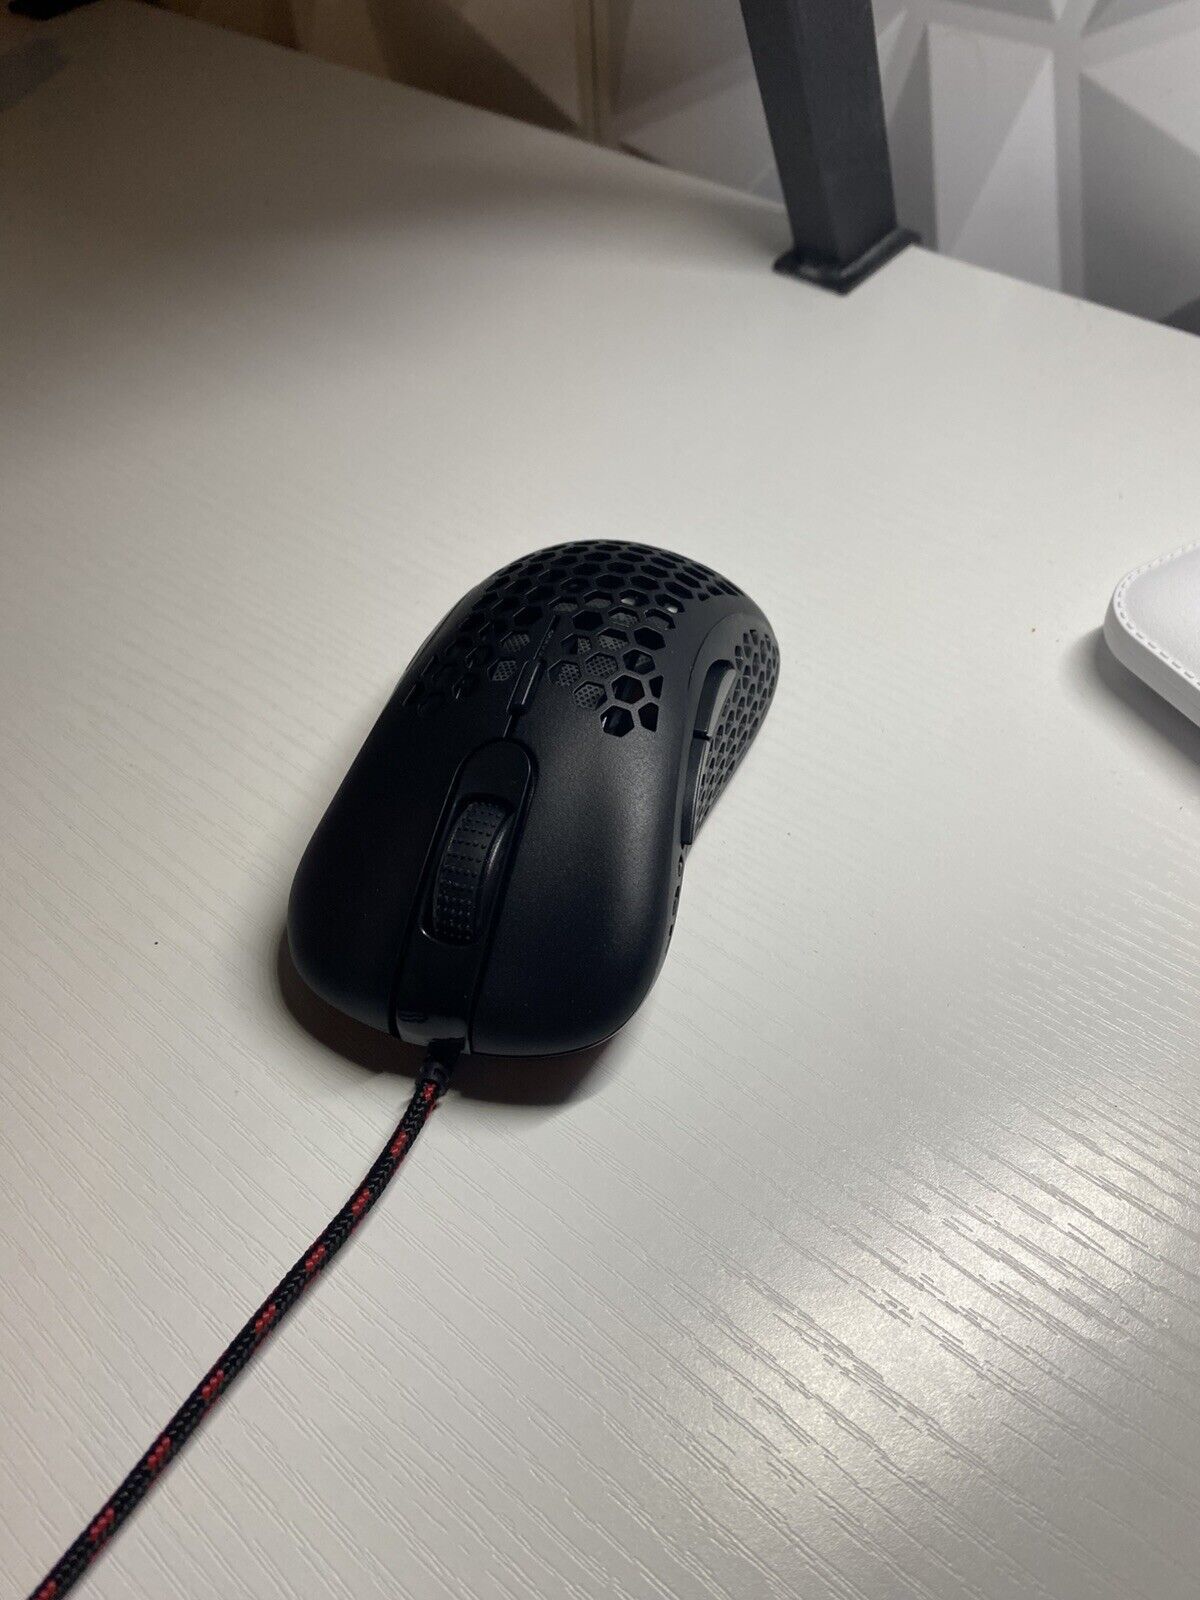 skytech gaming mouse